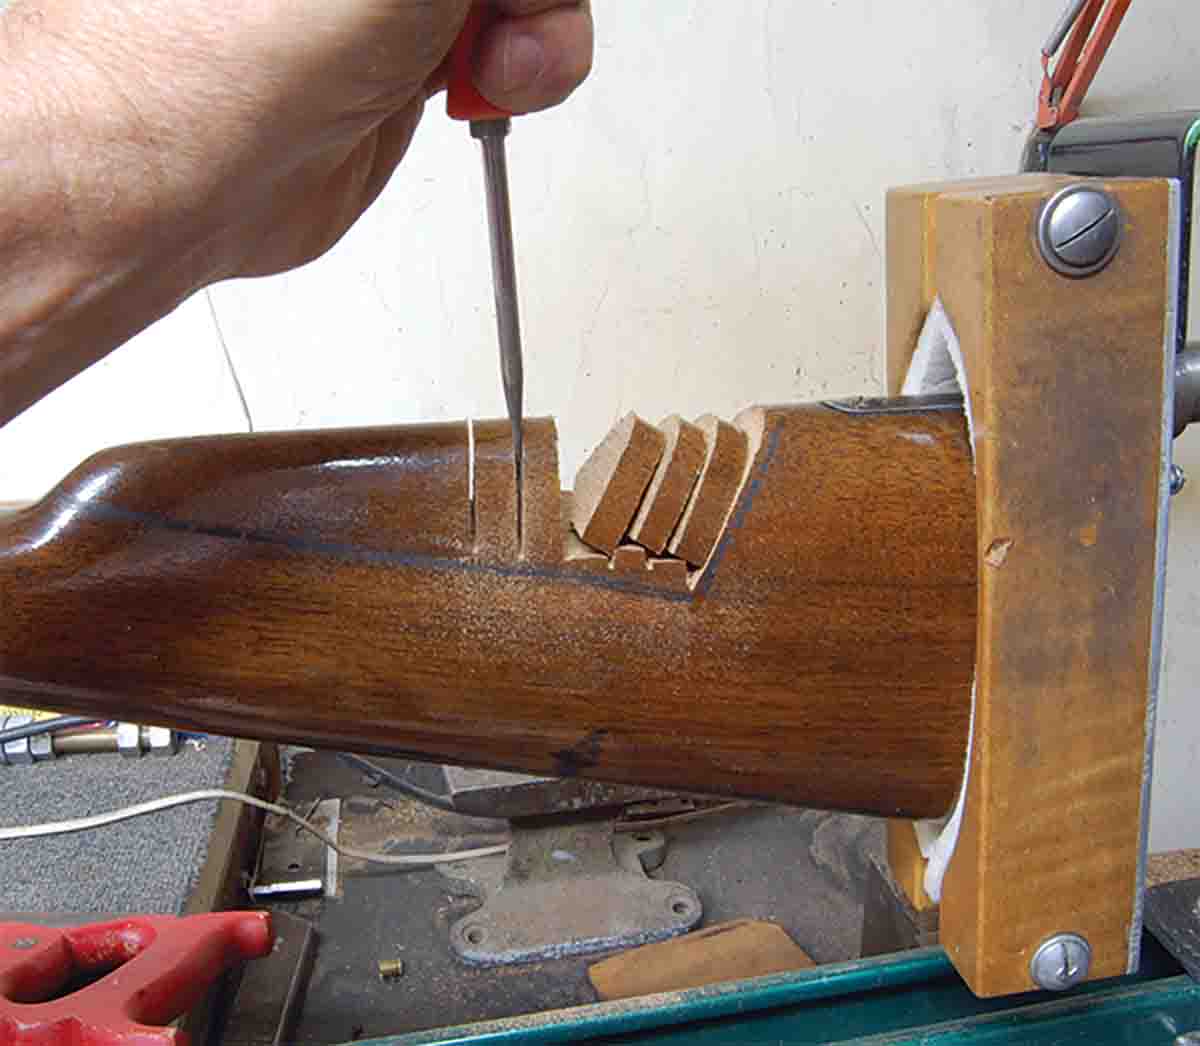 Wood is removed from the stock comb by sawing it and then snapping it off.